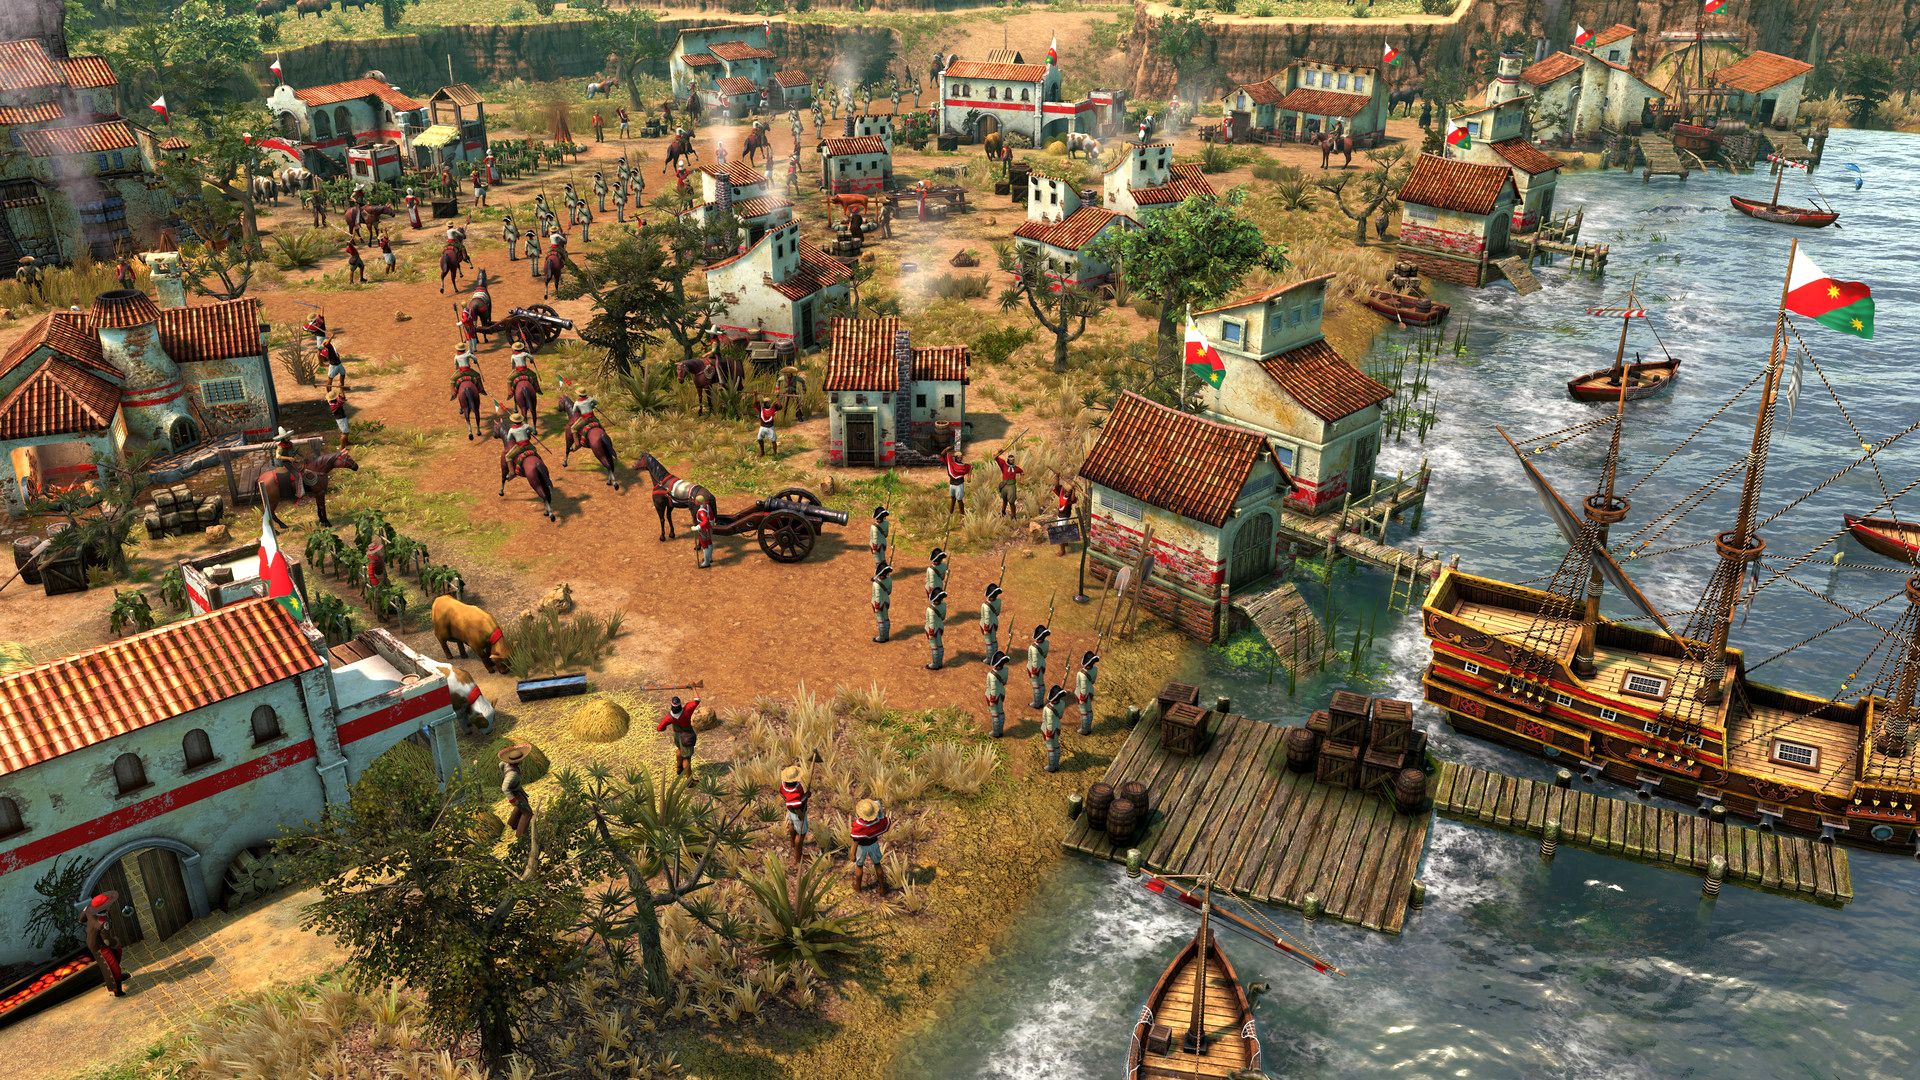 Age of Empires III: DE’s Mexico event is live – here’s how to get the rewards